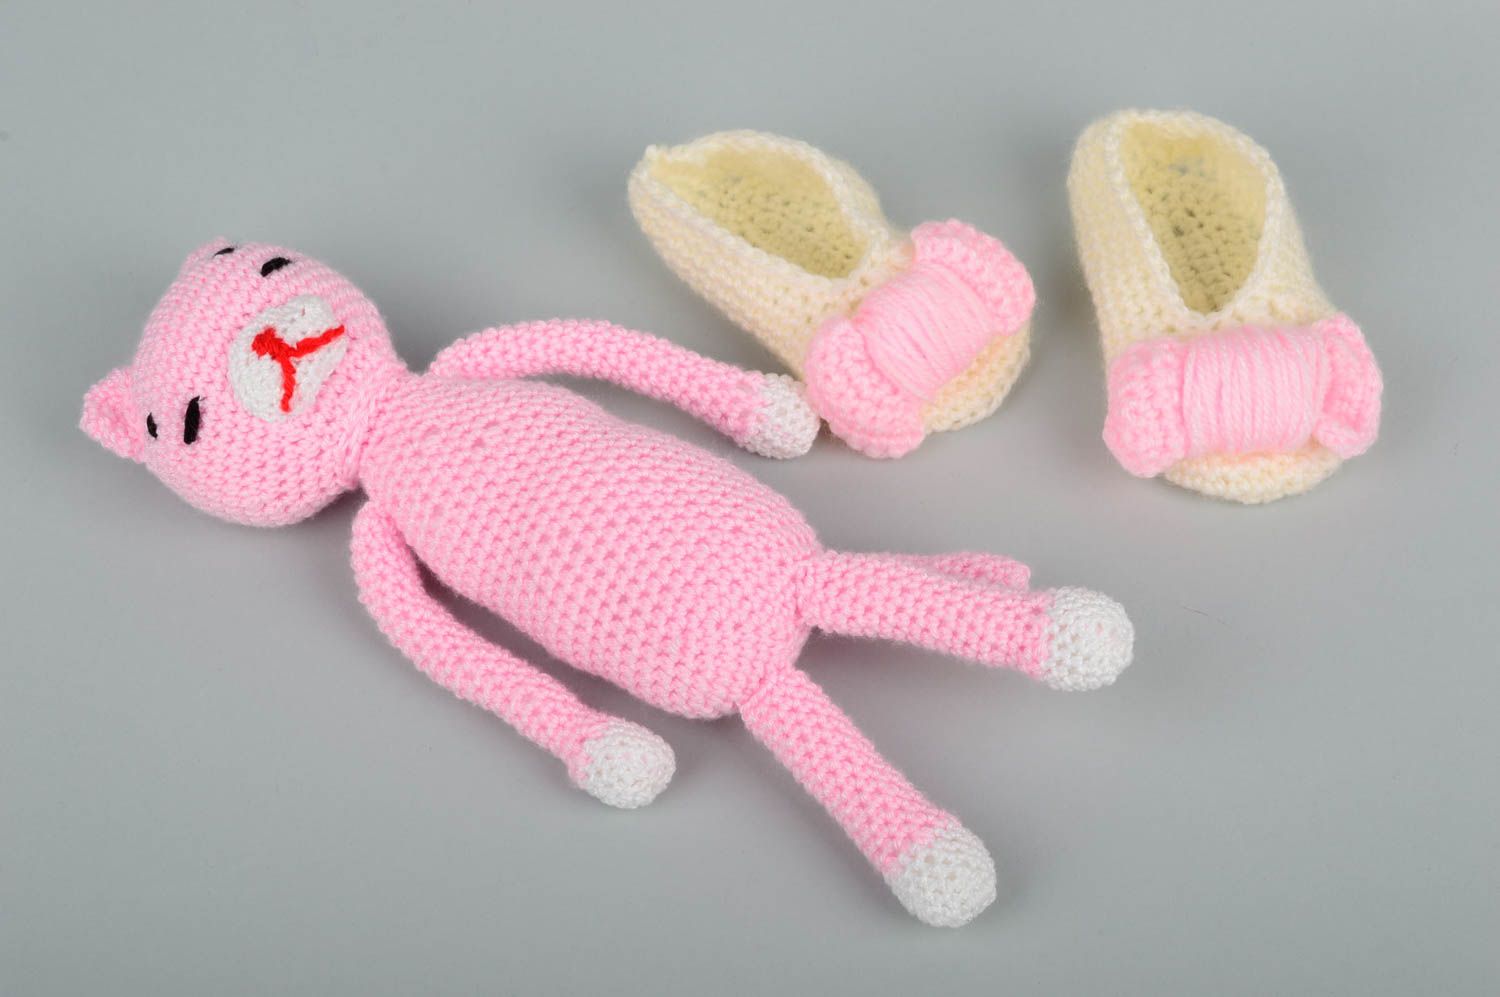 Handmade crochet soft toy crochet baby booties best toys for kids baby set photo 3